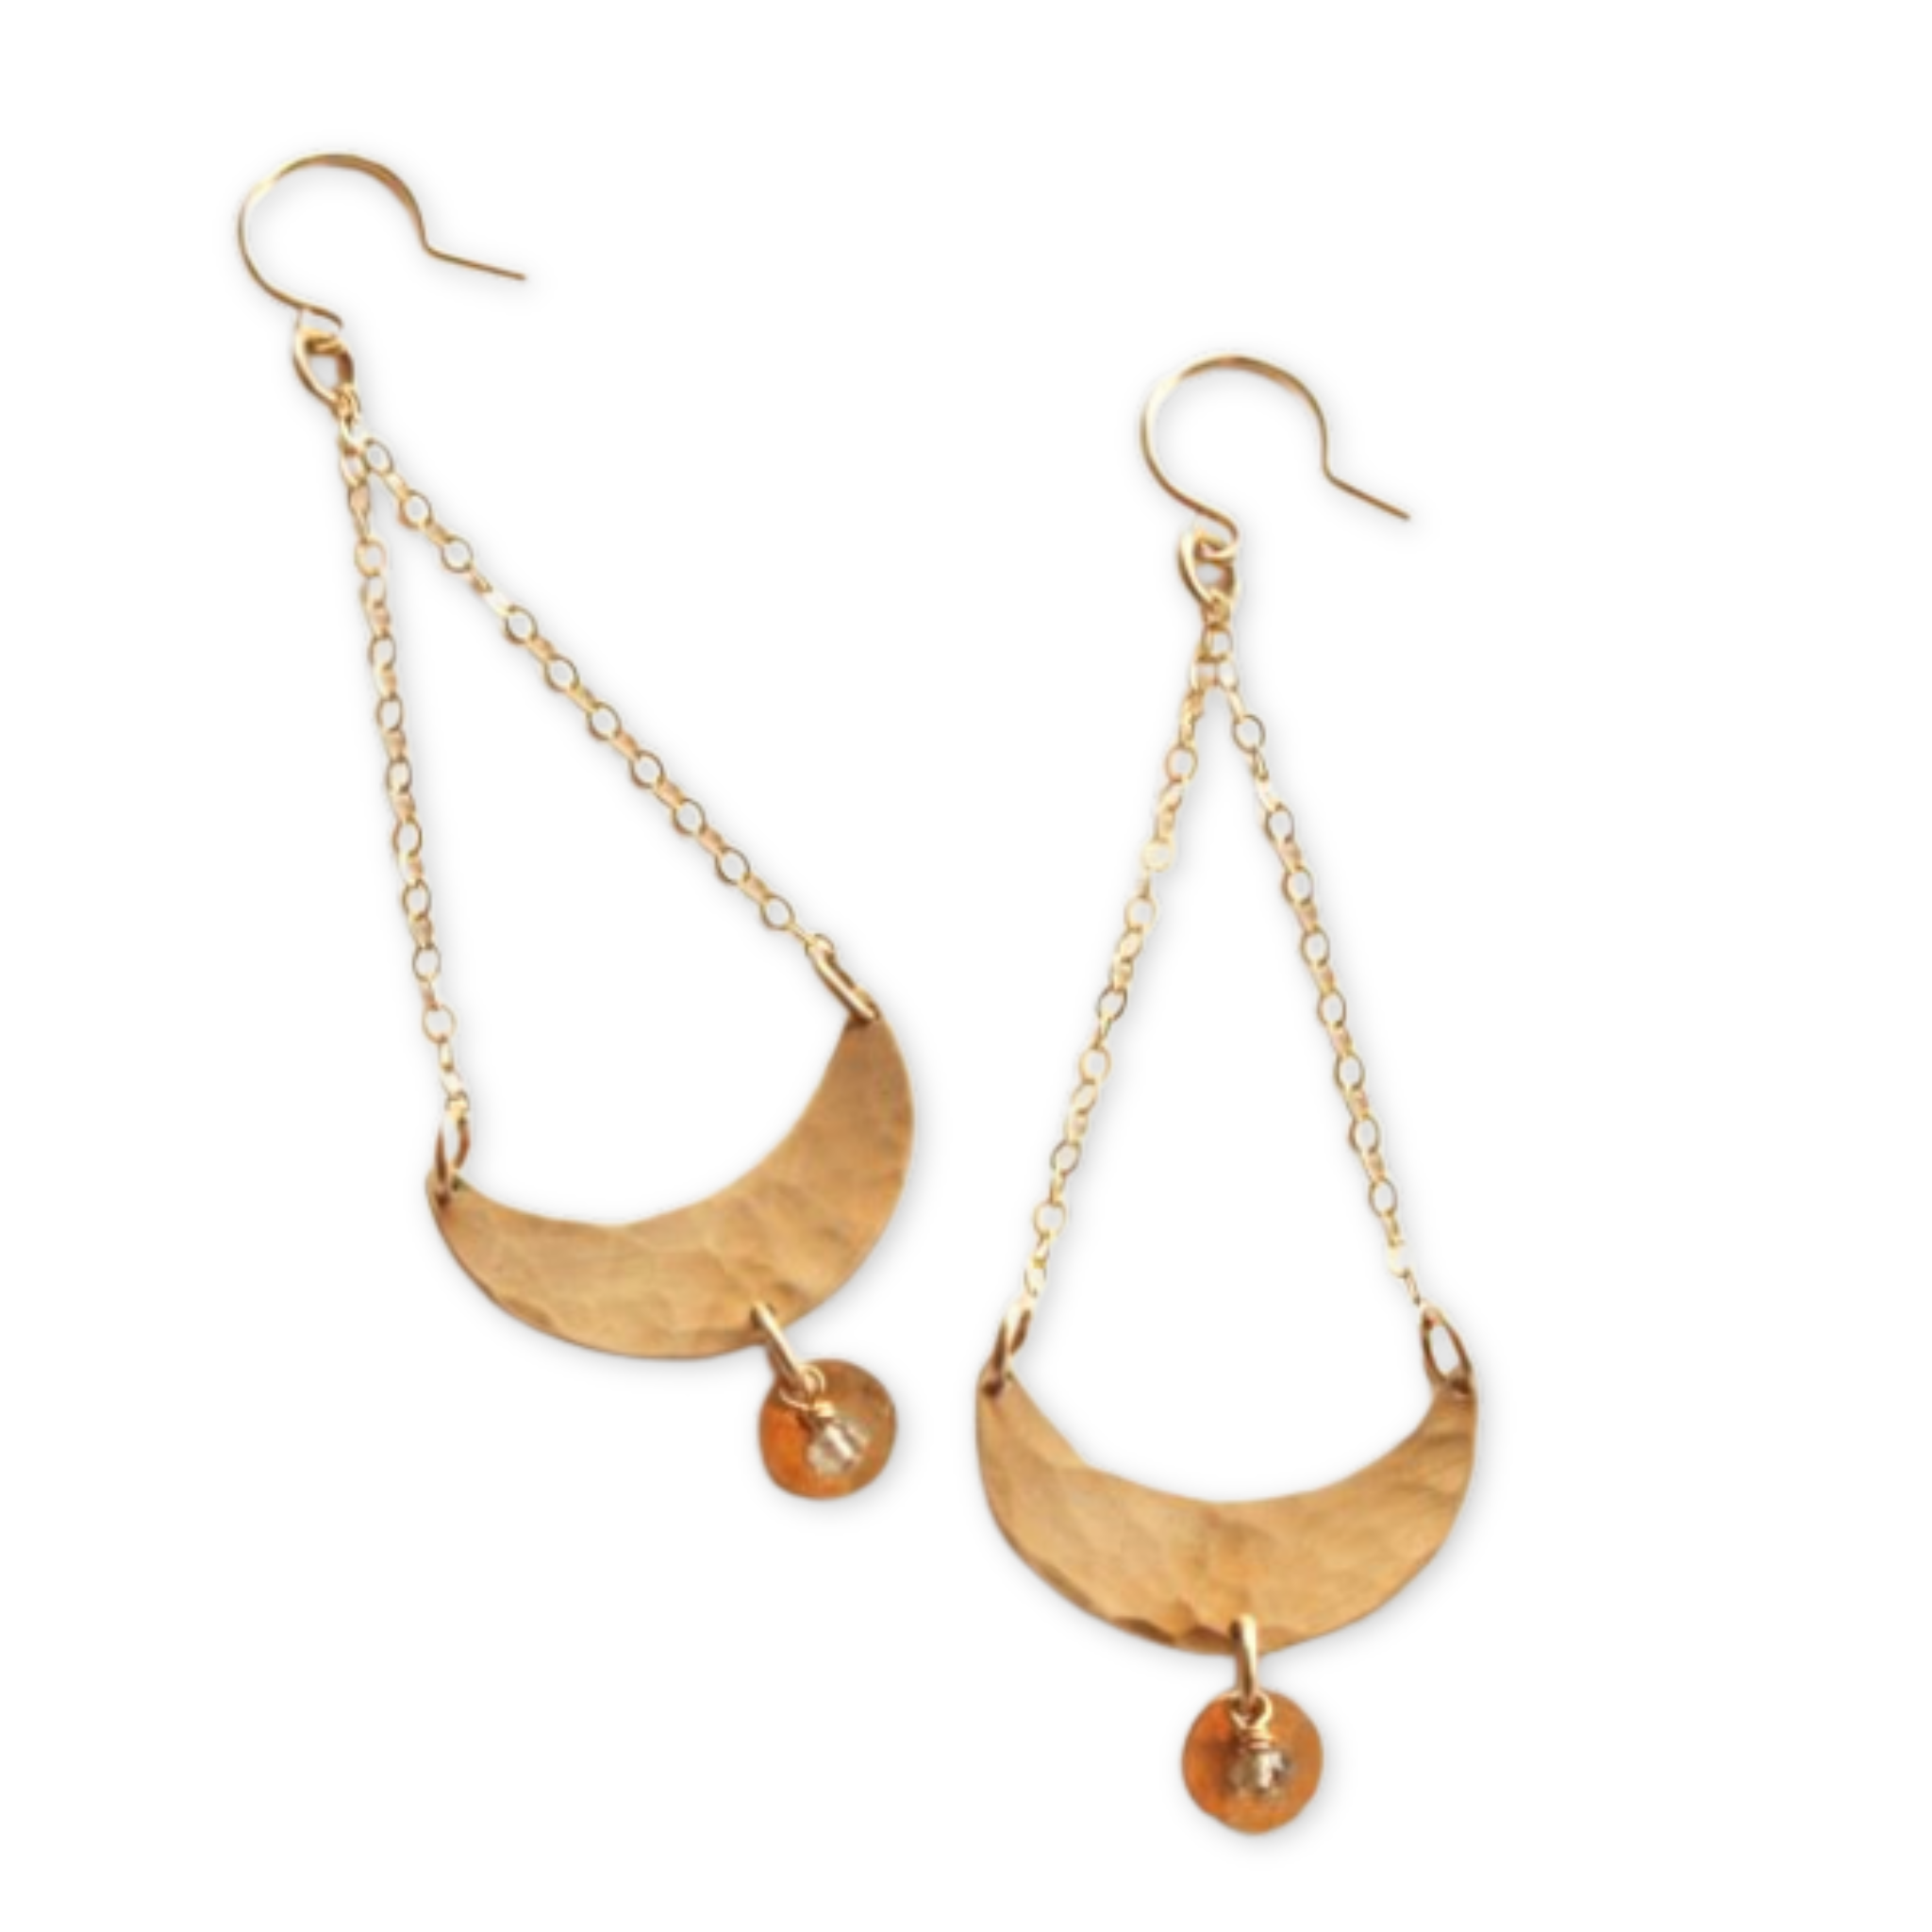 a pair of earrings with a crescent hanging from two chains and a round disk and a bead